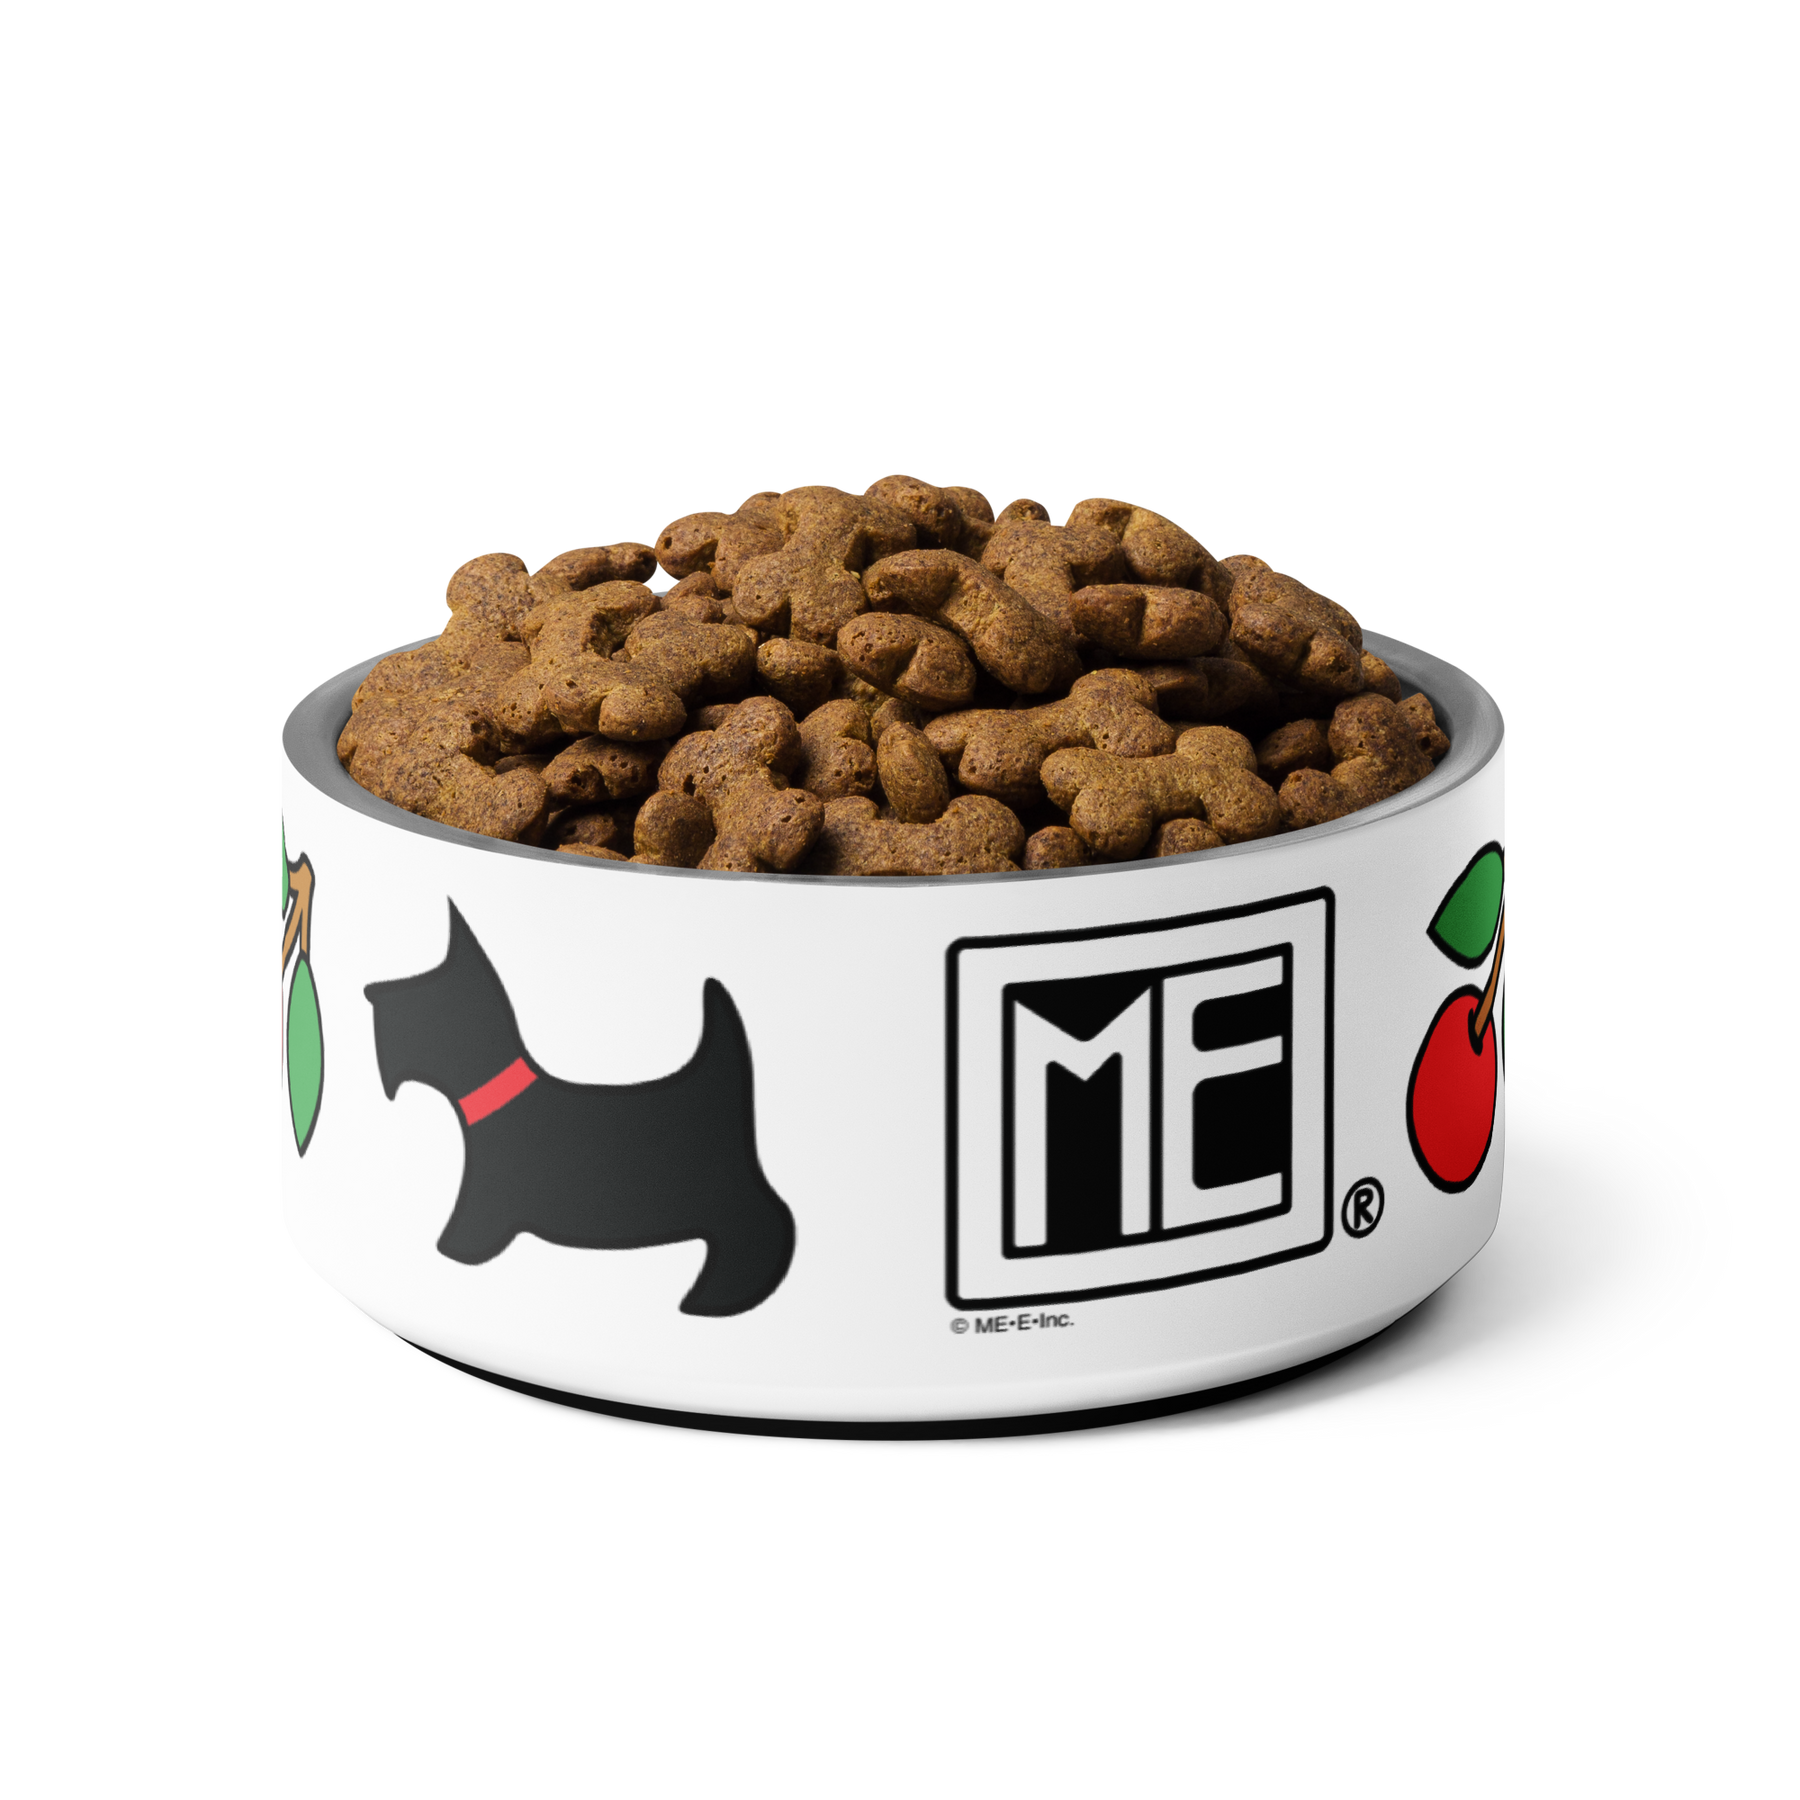 Mary's Icons Pet Bowl